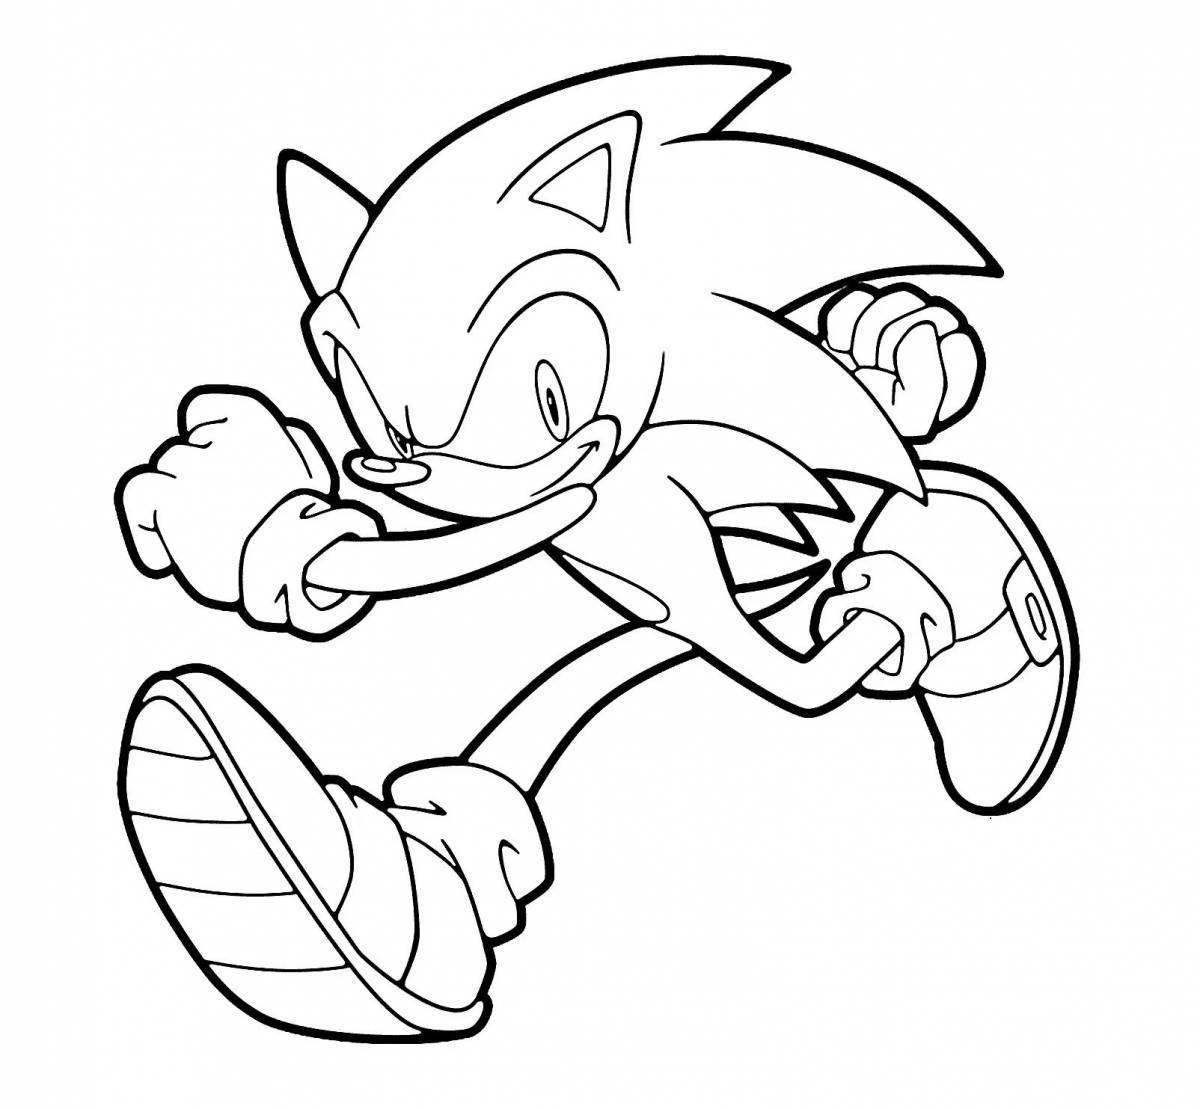 Vivacious coloring page sonic igzy